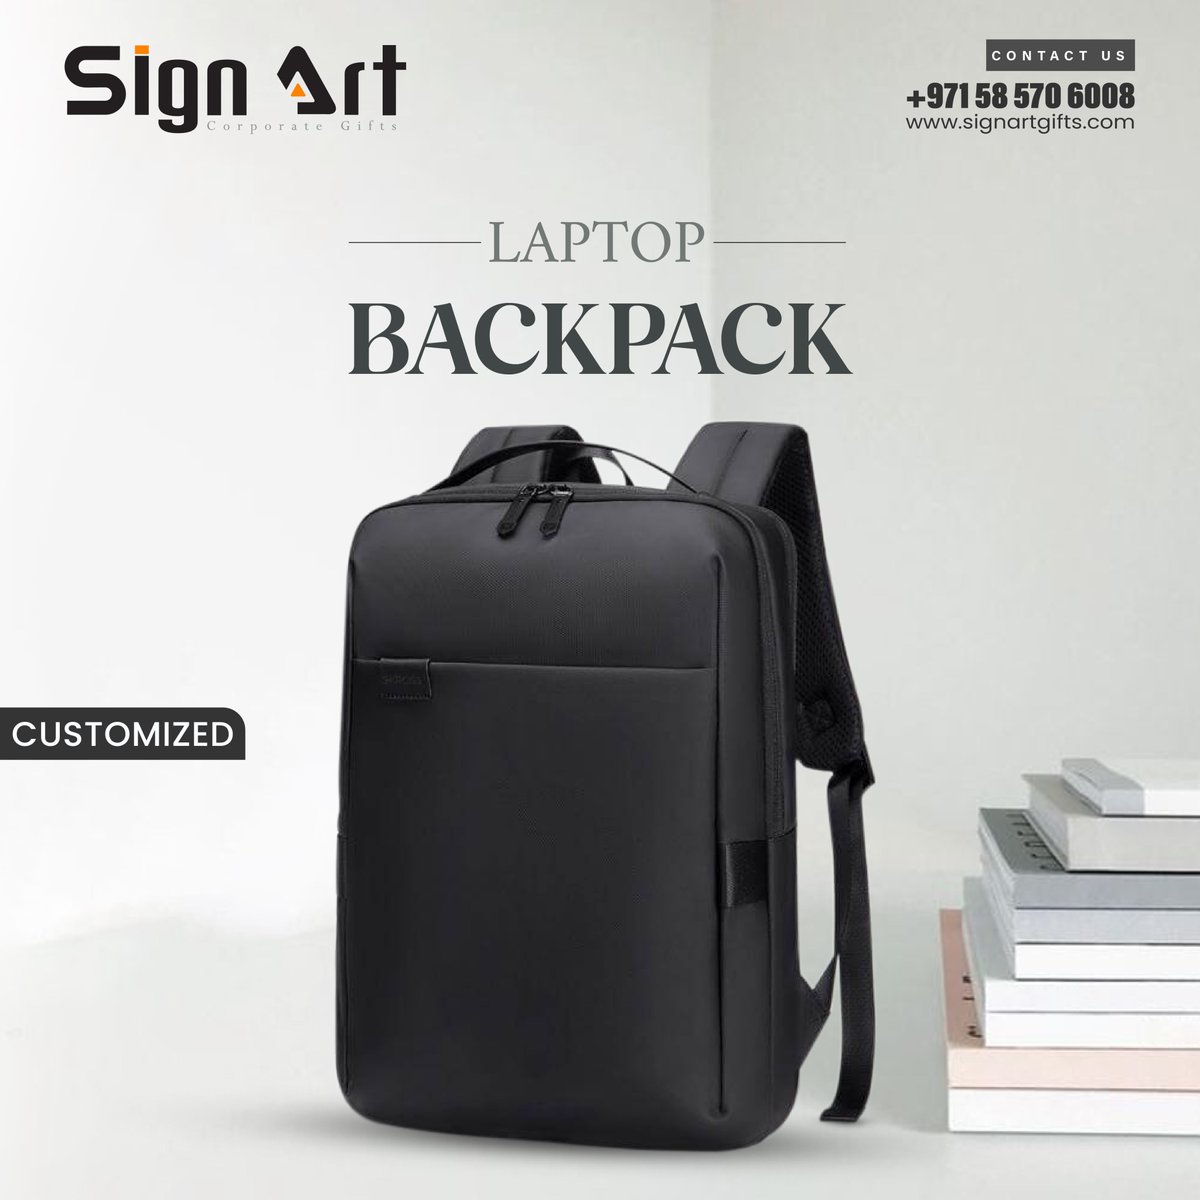 Laptop Backpack
WhatsApp: 058 570 6008

Learn more: signartgifts.com

#customized #customizedgifts #promotionalproducts #personalizedgifts #laptopbag #laptopbagbranding #BagBranding #officebags #brandingagency #CustomizedBranding #printingservices #dubaiprinting